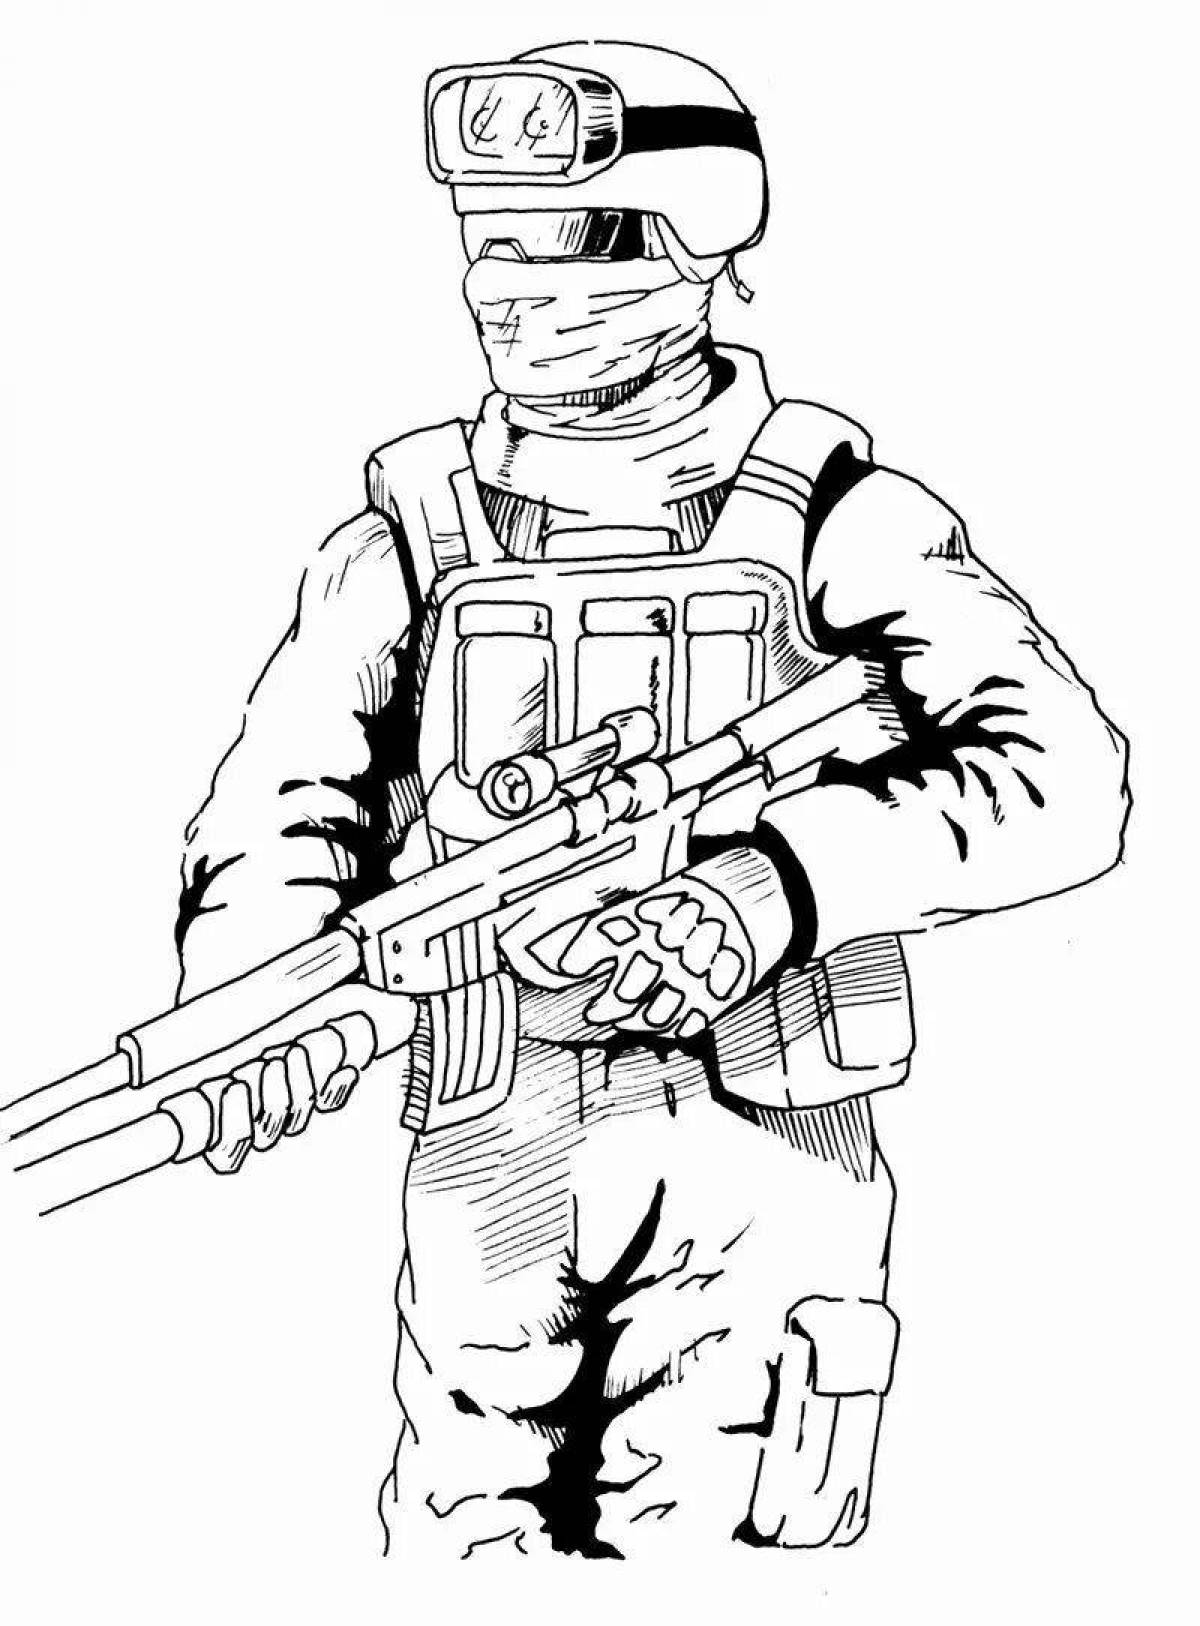 Counter strike dynamic coloring page